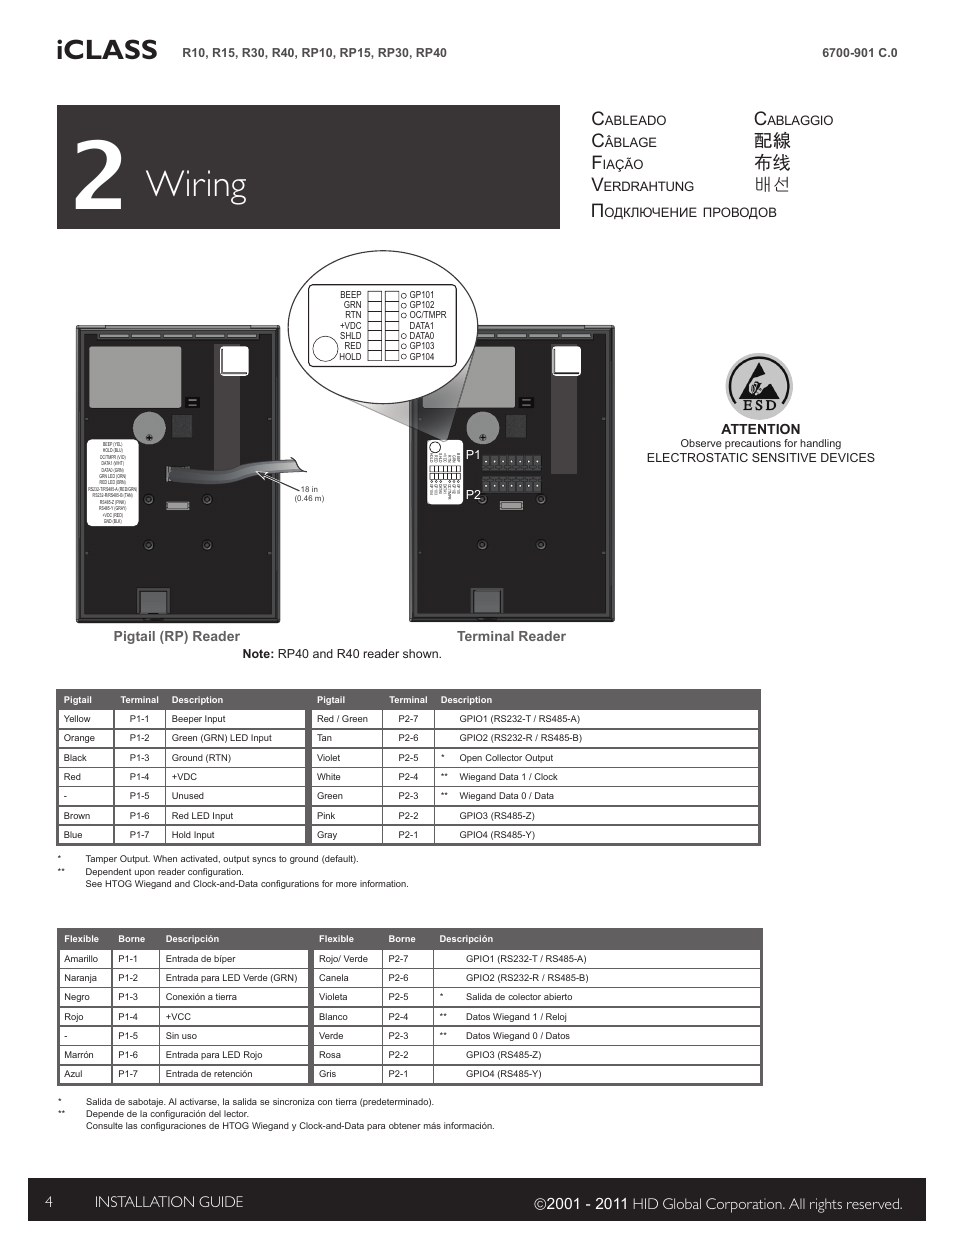 2 Wiring Wiring Iclass Hid Iclass Se Installation Guide User Manual Page 4 10